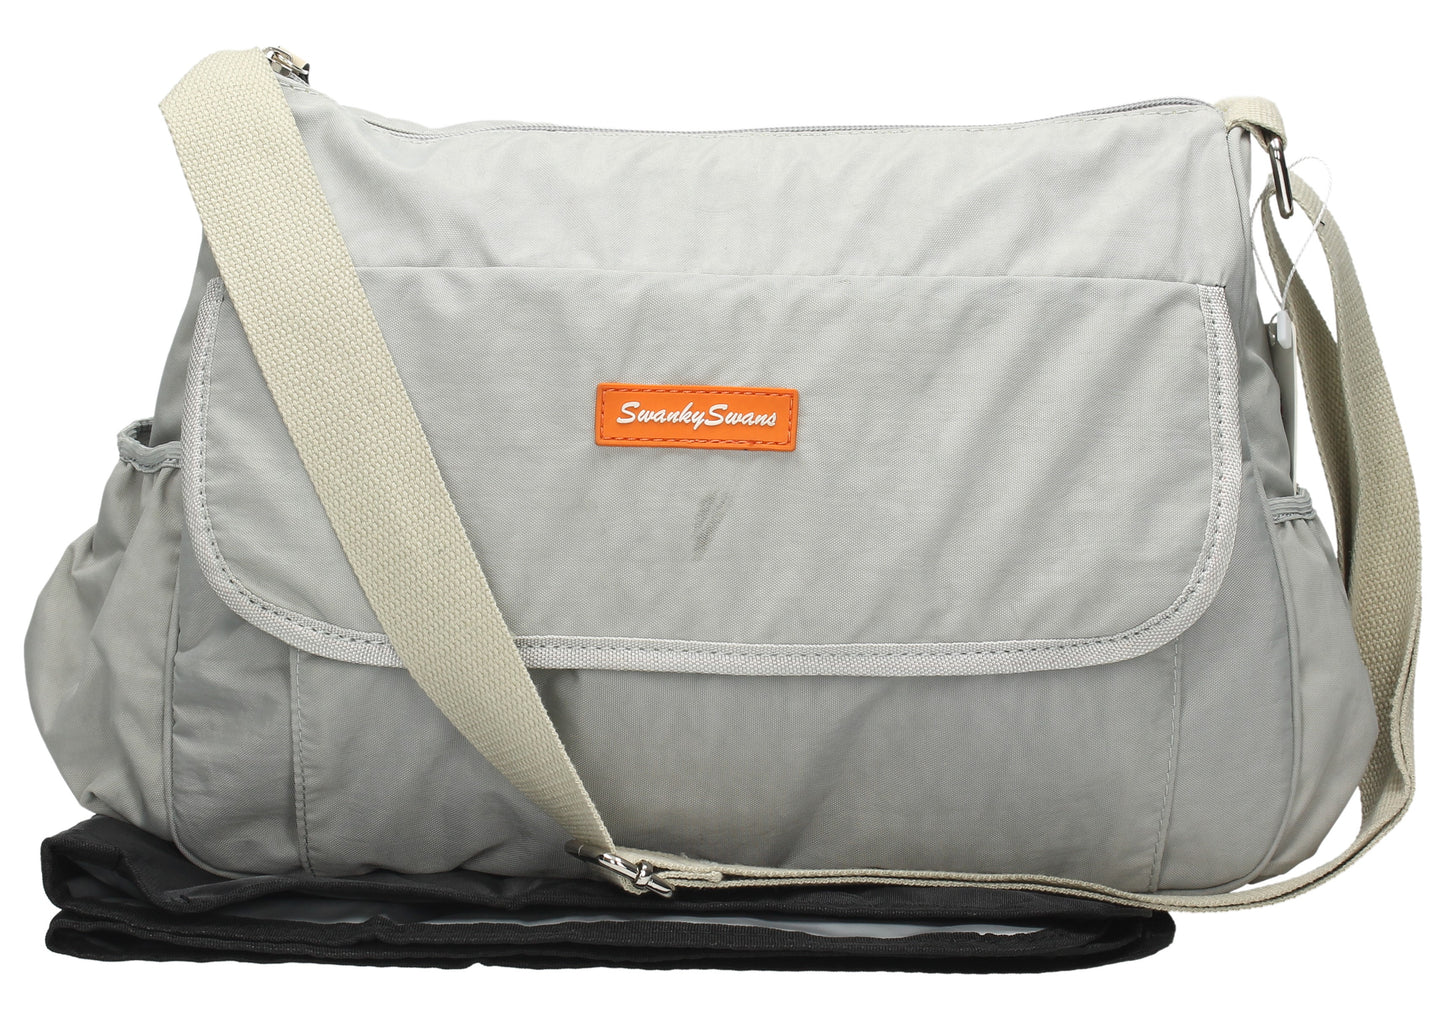 Joseph and Mary Baby Changing Satchel - Grey-Baby Changing-SWANKYSWANS